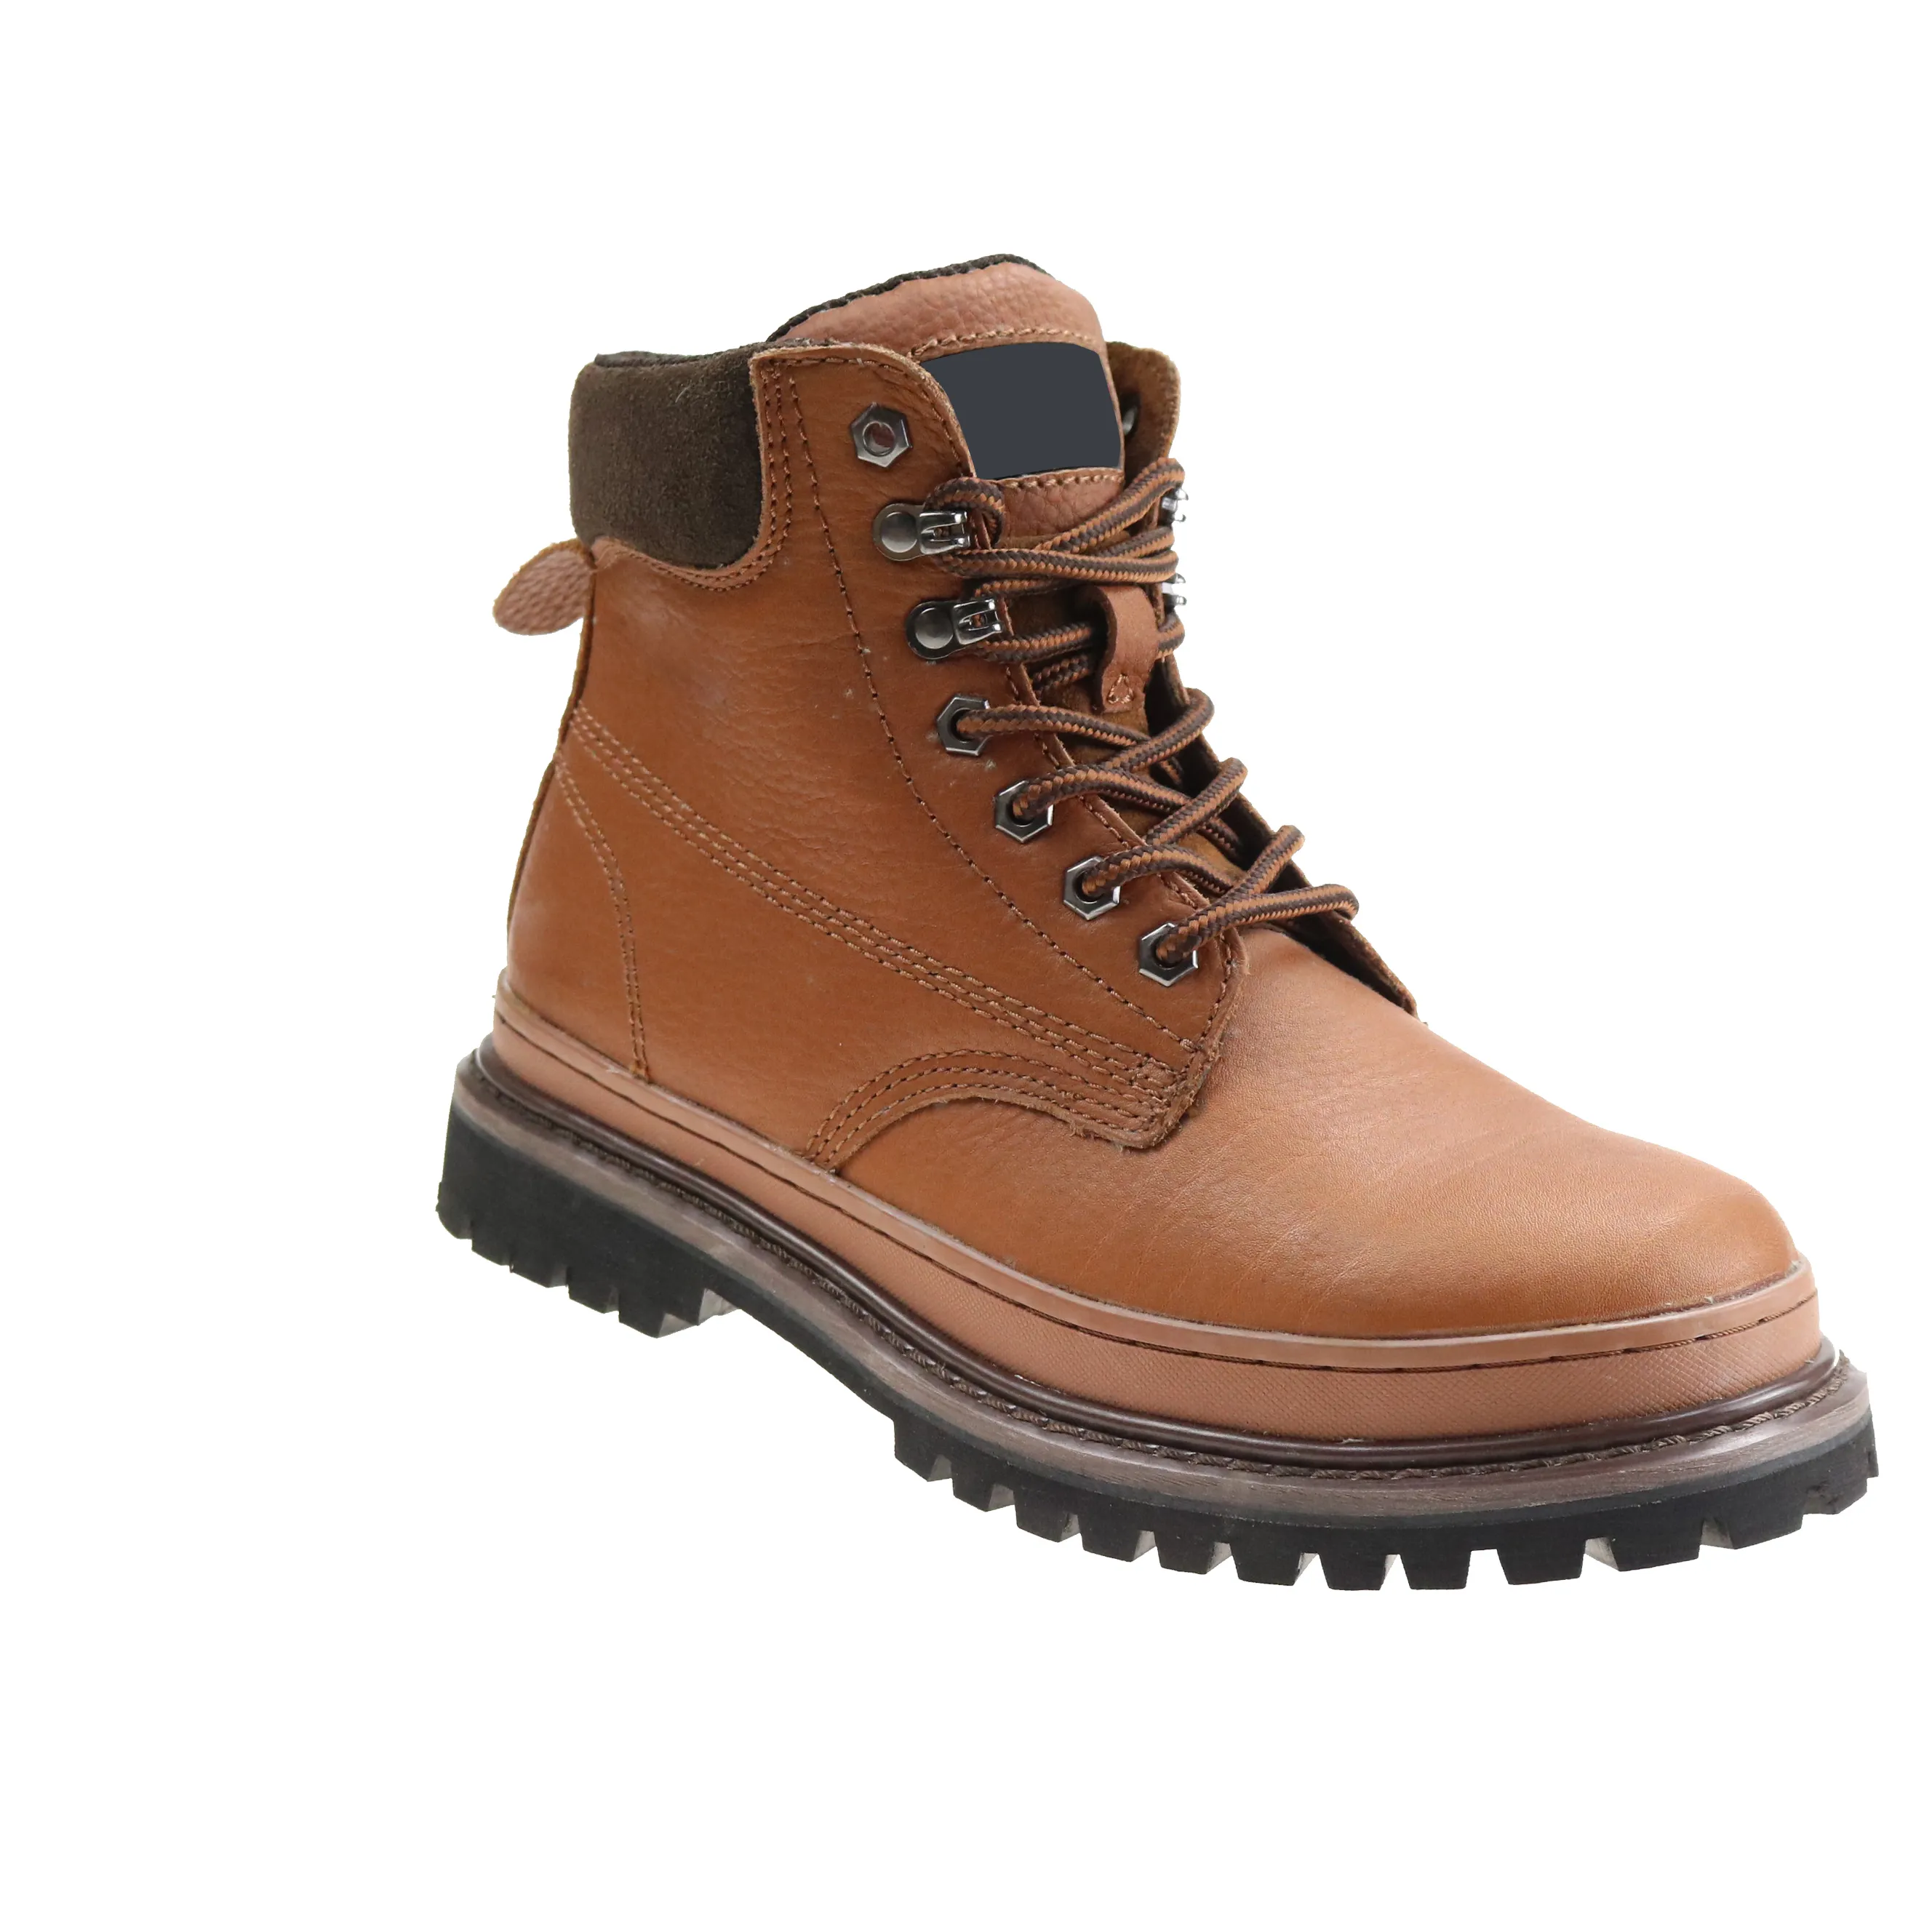 high-top goodyear welted rubber sole cow leather fiber toe wear resistant men comfortable esd safety shoes